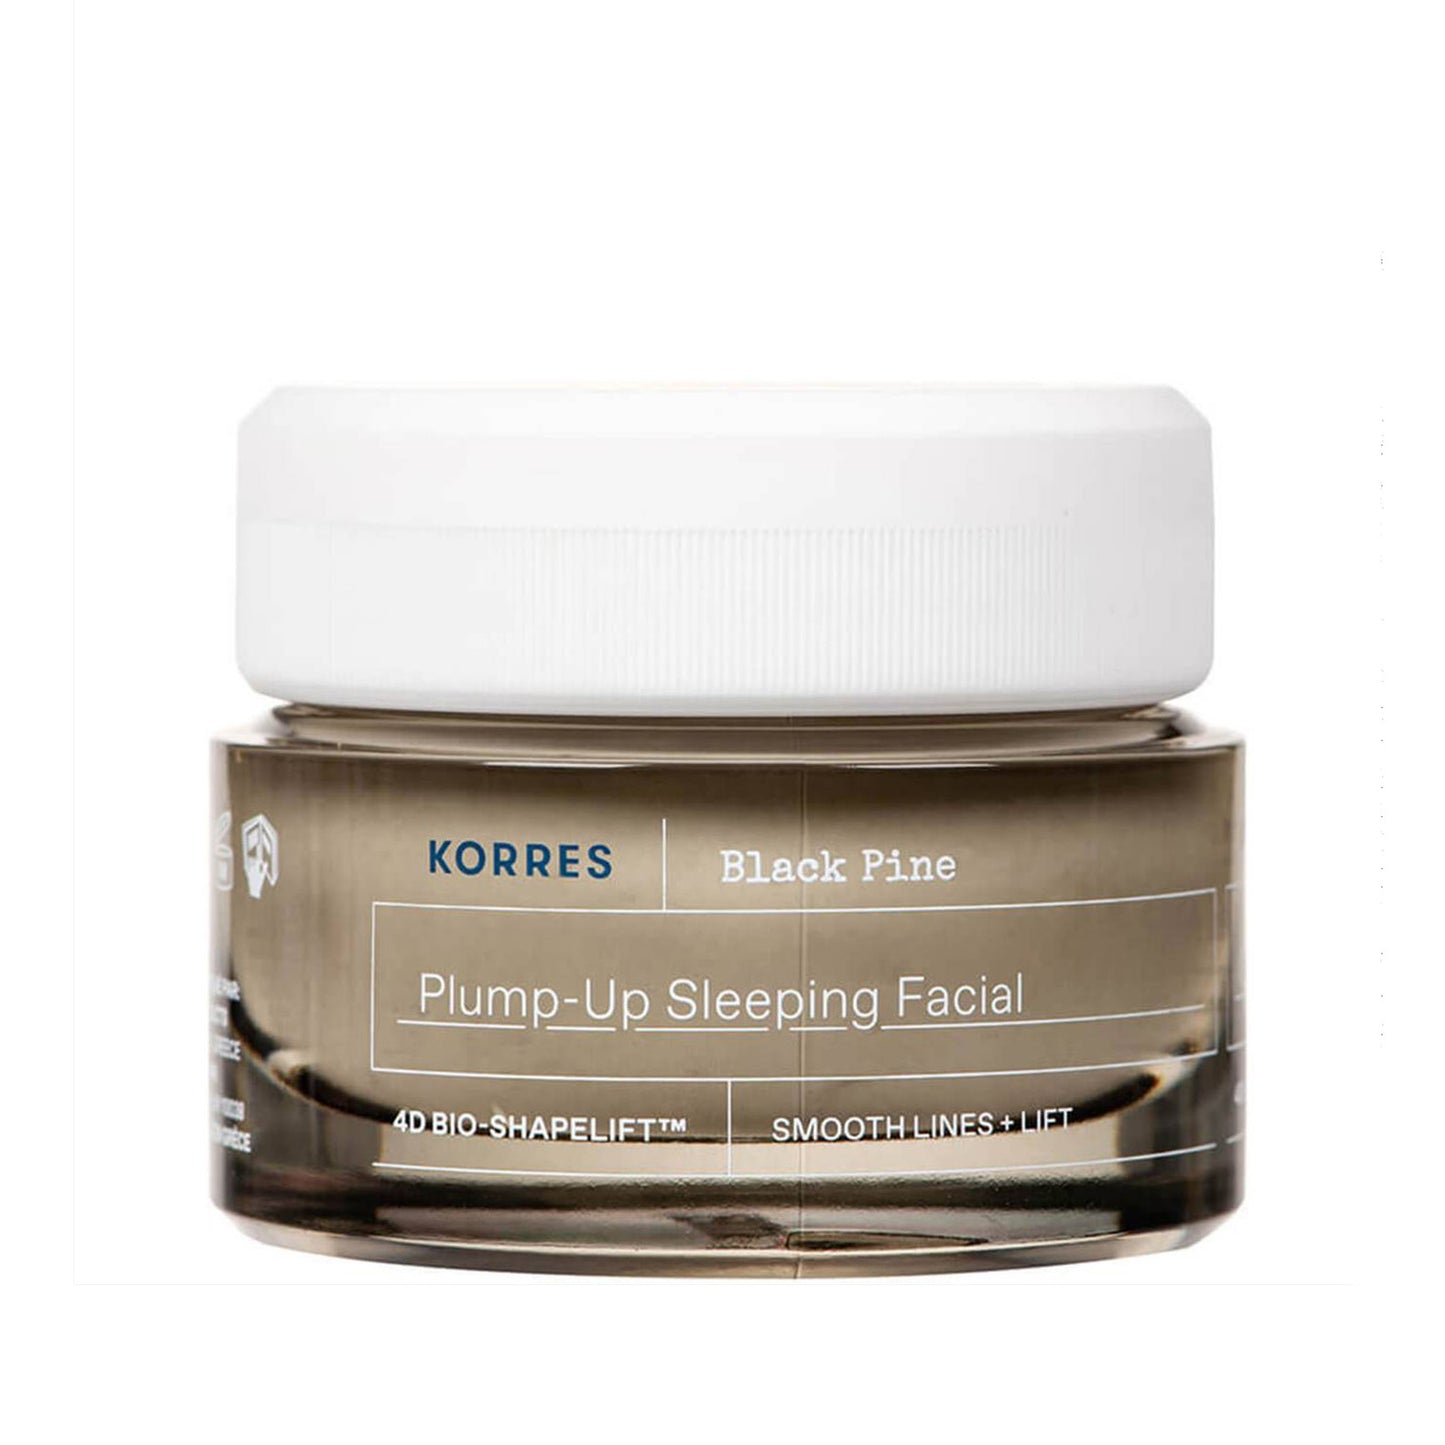 Korres Black Pine 4D BioShapeLift Plump-up Sleeping Facial reduces the appearance of wrinkles and fine lines while stimulating oxygenation and collagen synthesis for healthier, younger-looking and more radiant skin. 